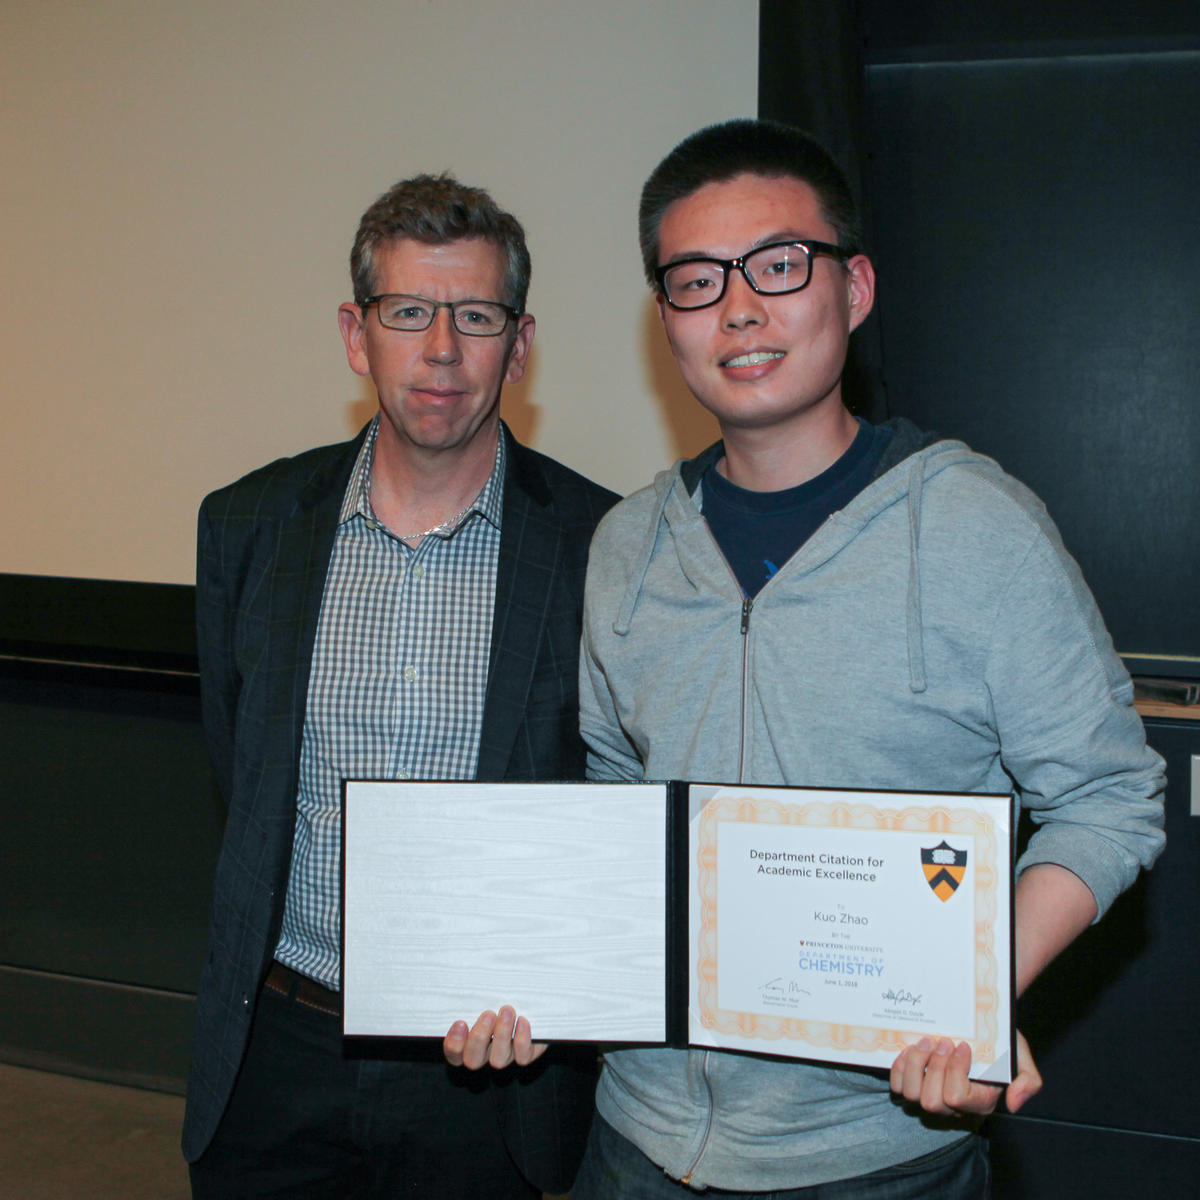 Tom Muir and Kuo Zhao (Knowles lab), recipient of the Department Citation for Academic Excellence.